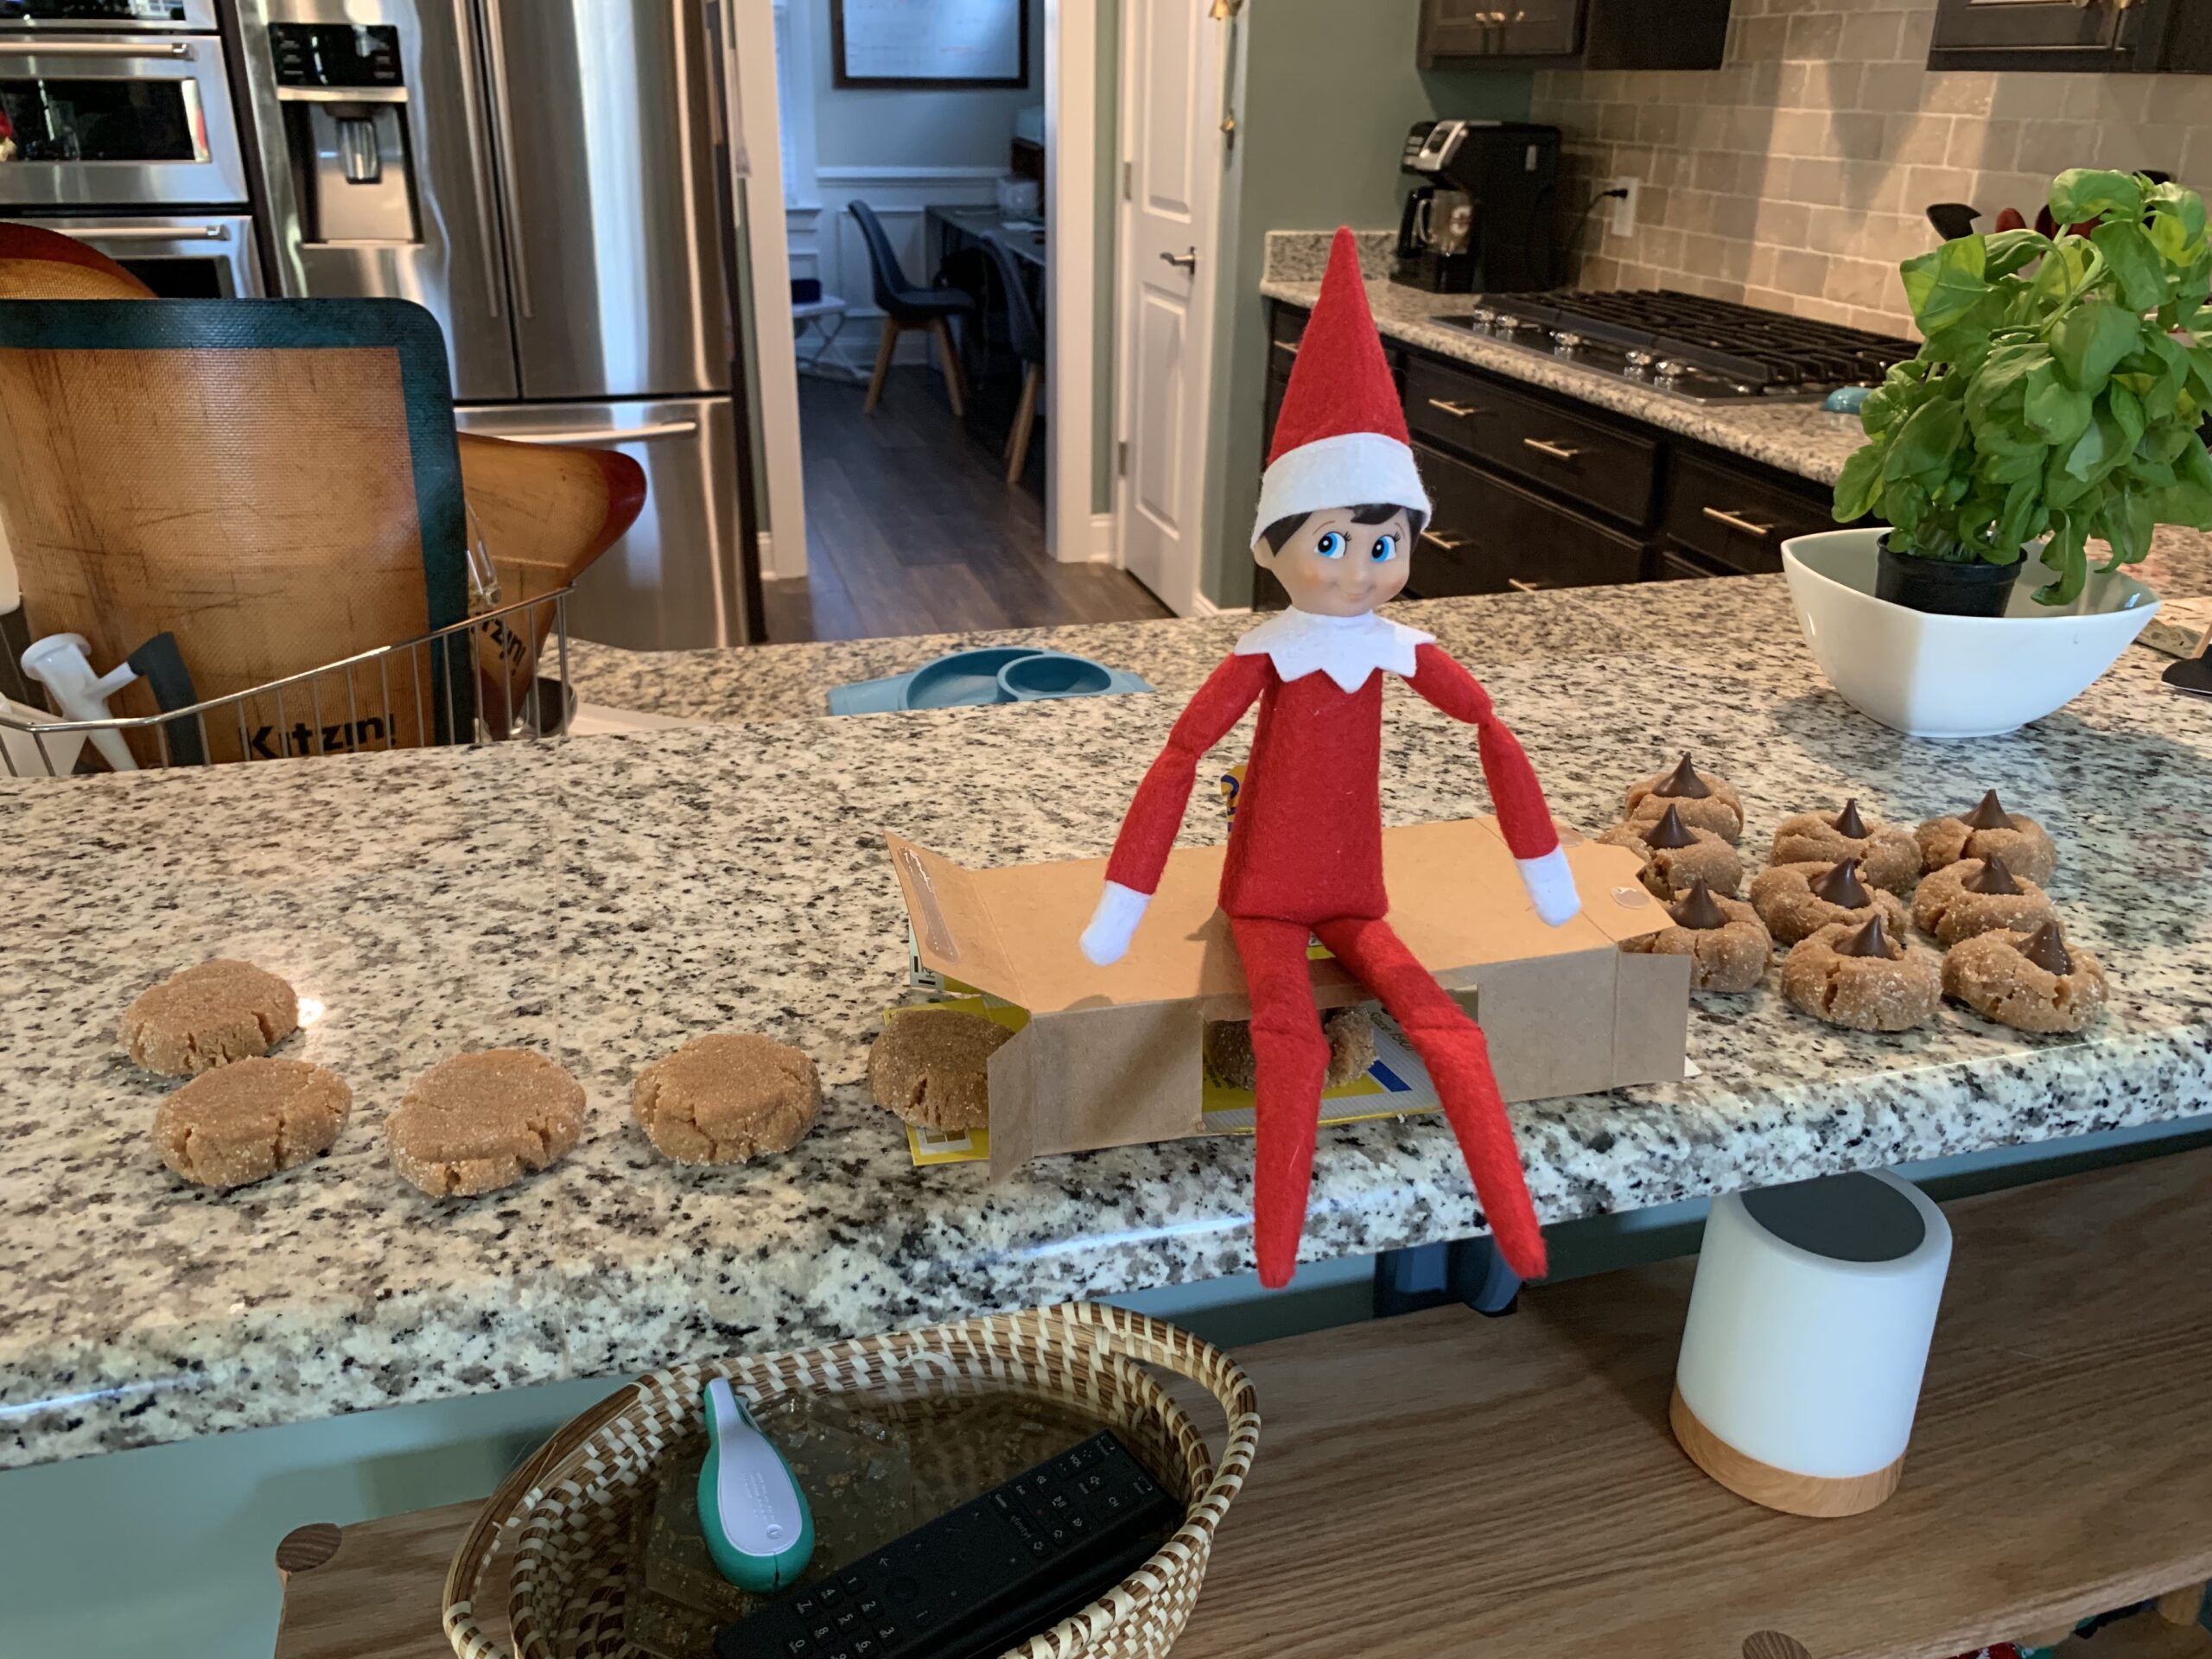 The 126 best elf on the shelf names - Celebrating with kids